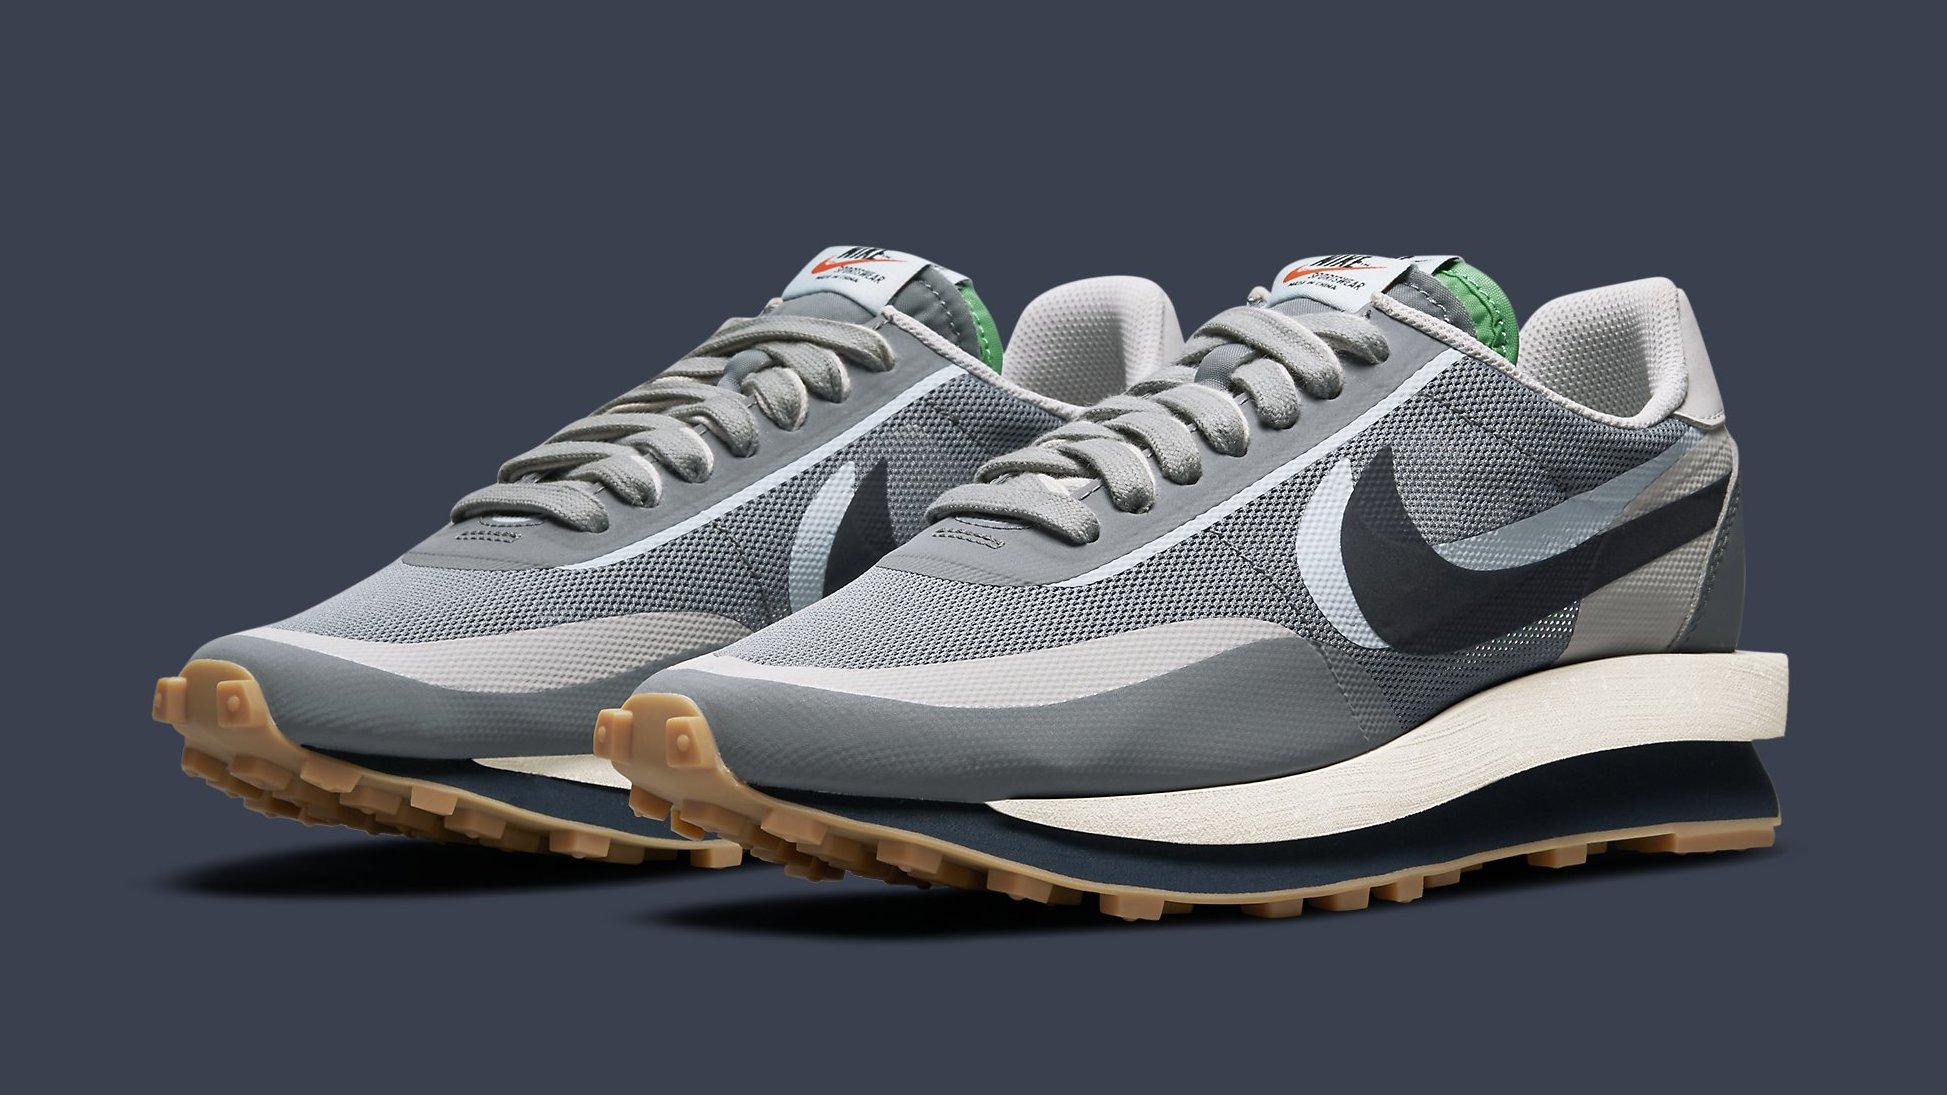 Clot x Sacai x Nike LDWaffle 'Cool Grey' Is Releasing on SNKRS